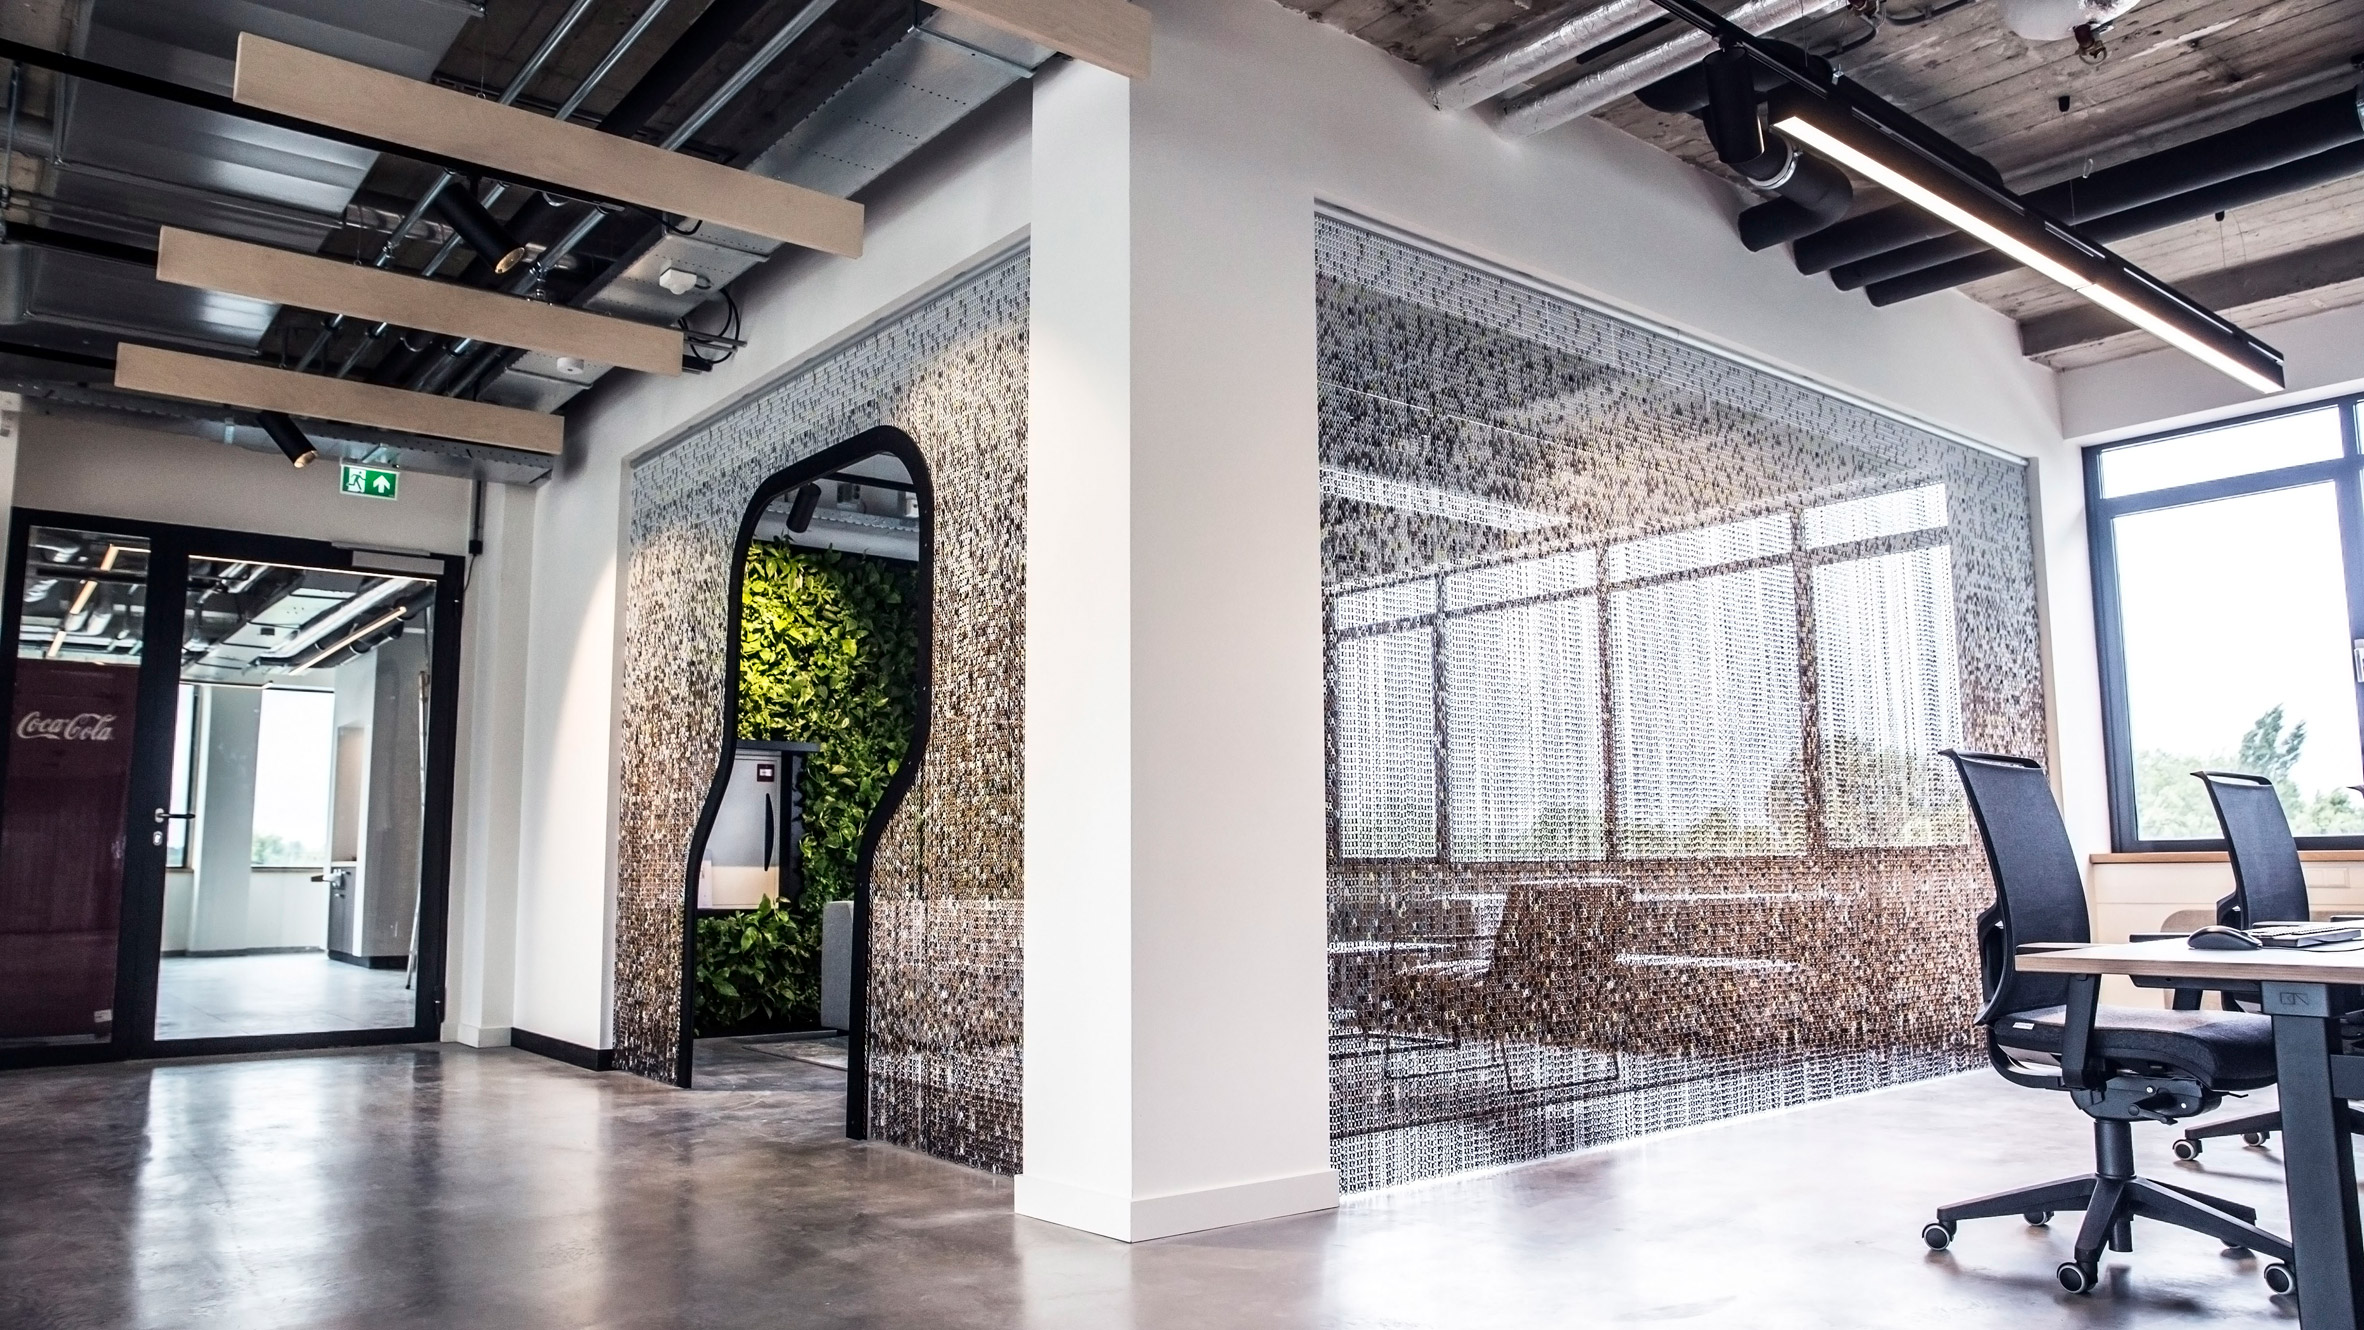 Kriskadecor's chain-link partitions aid social distancing in shared interiors